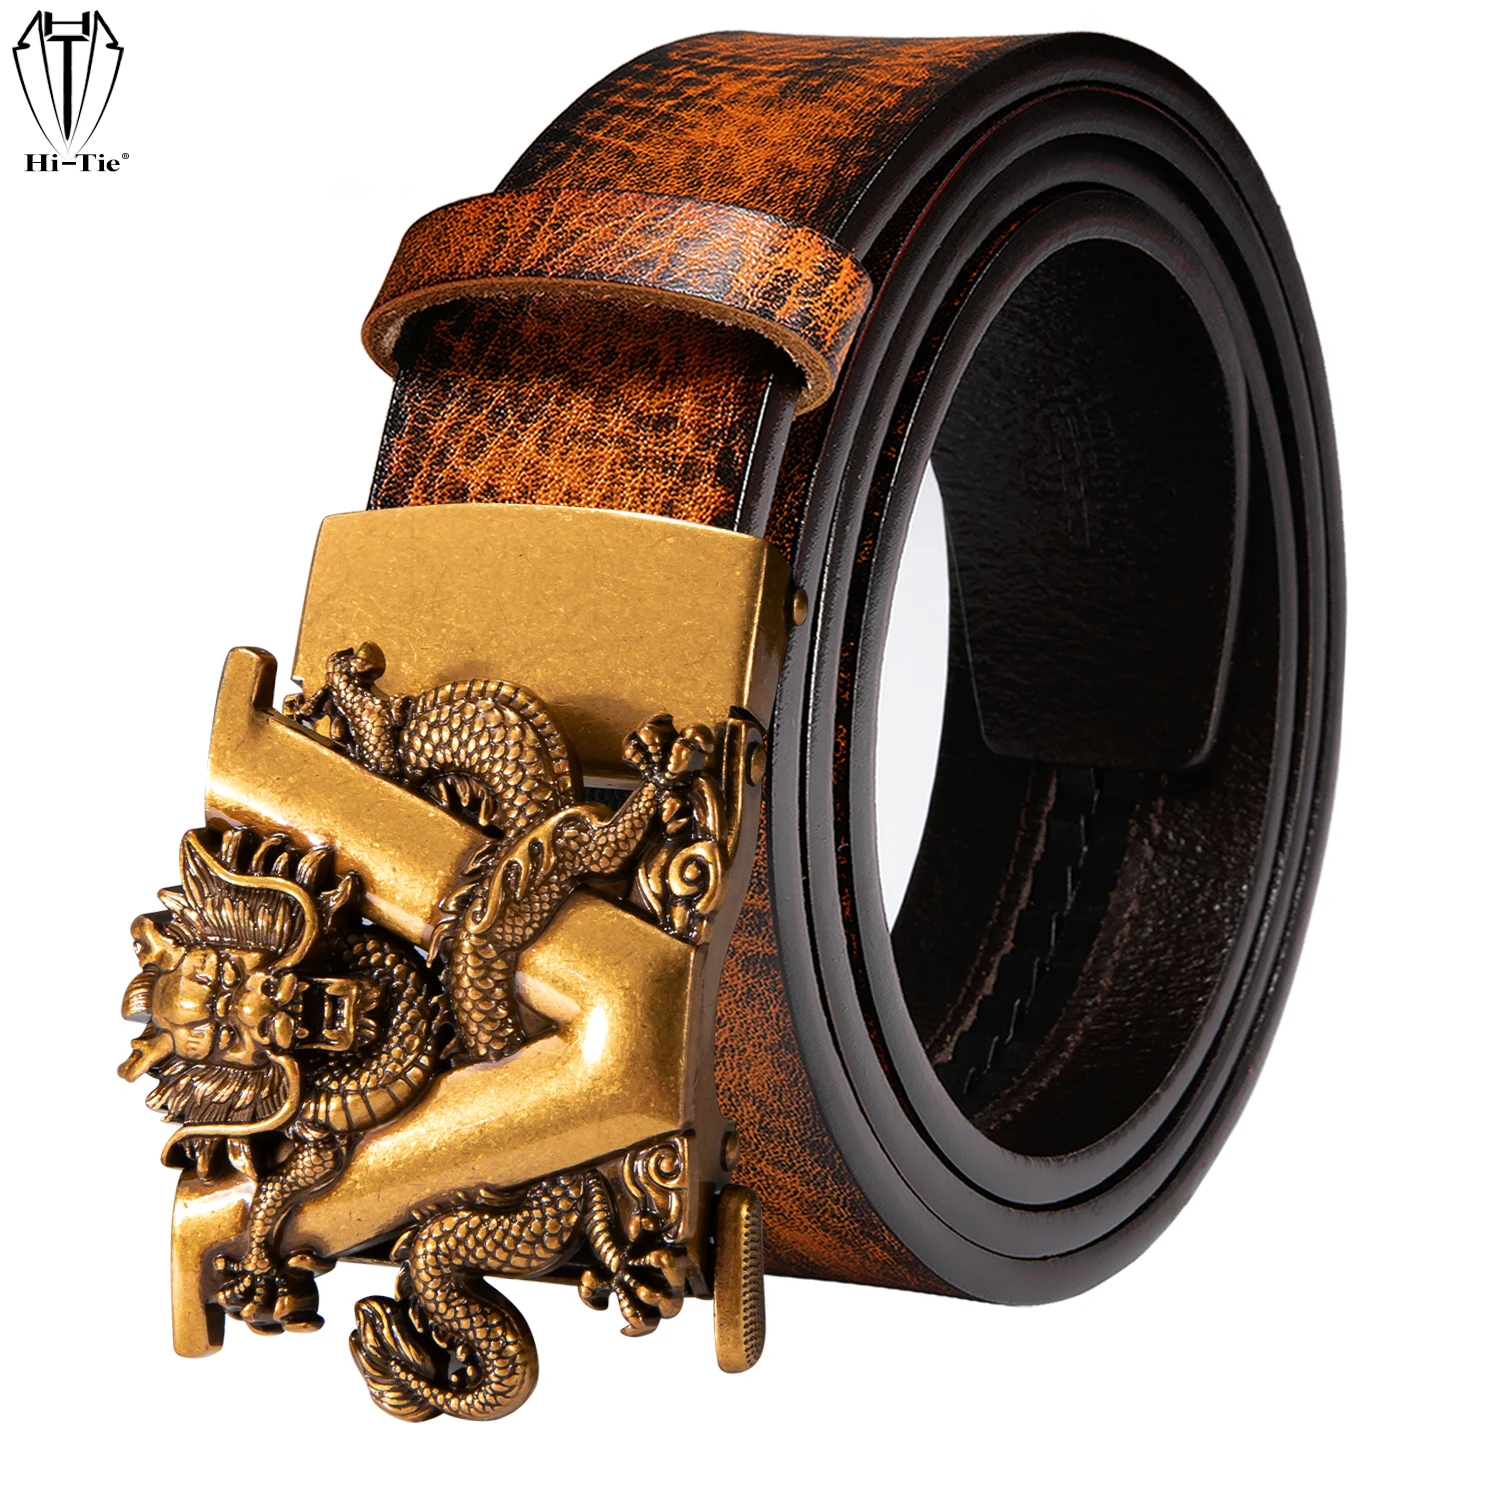 

Casual Tan Leather Mens Belts Dress Jeans Waist Strap Slide Ratchet Automatic Buckle Waistband for Men Wedding Business Luxury